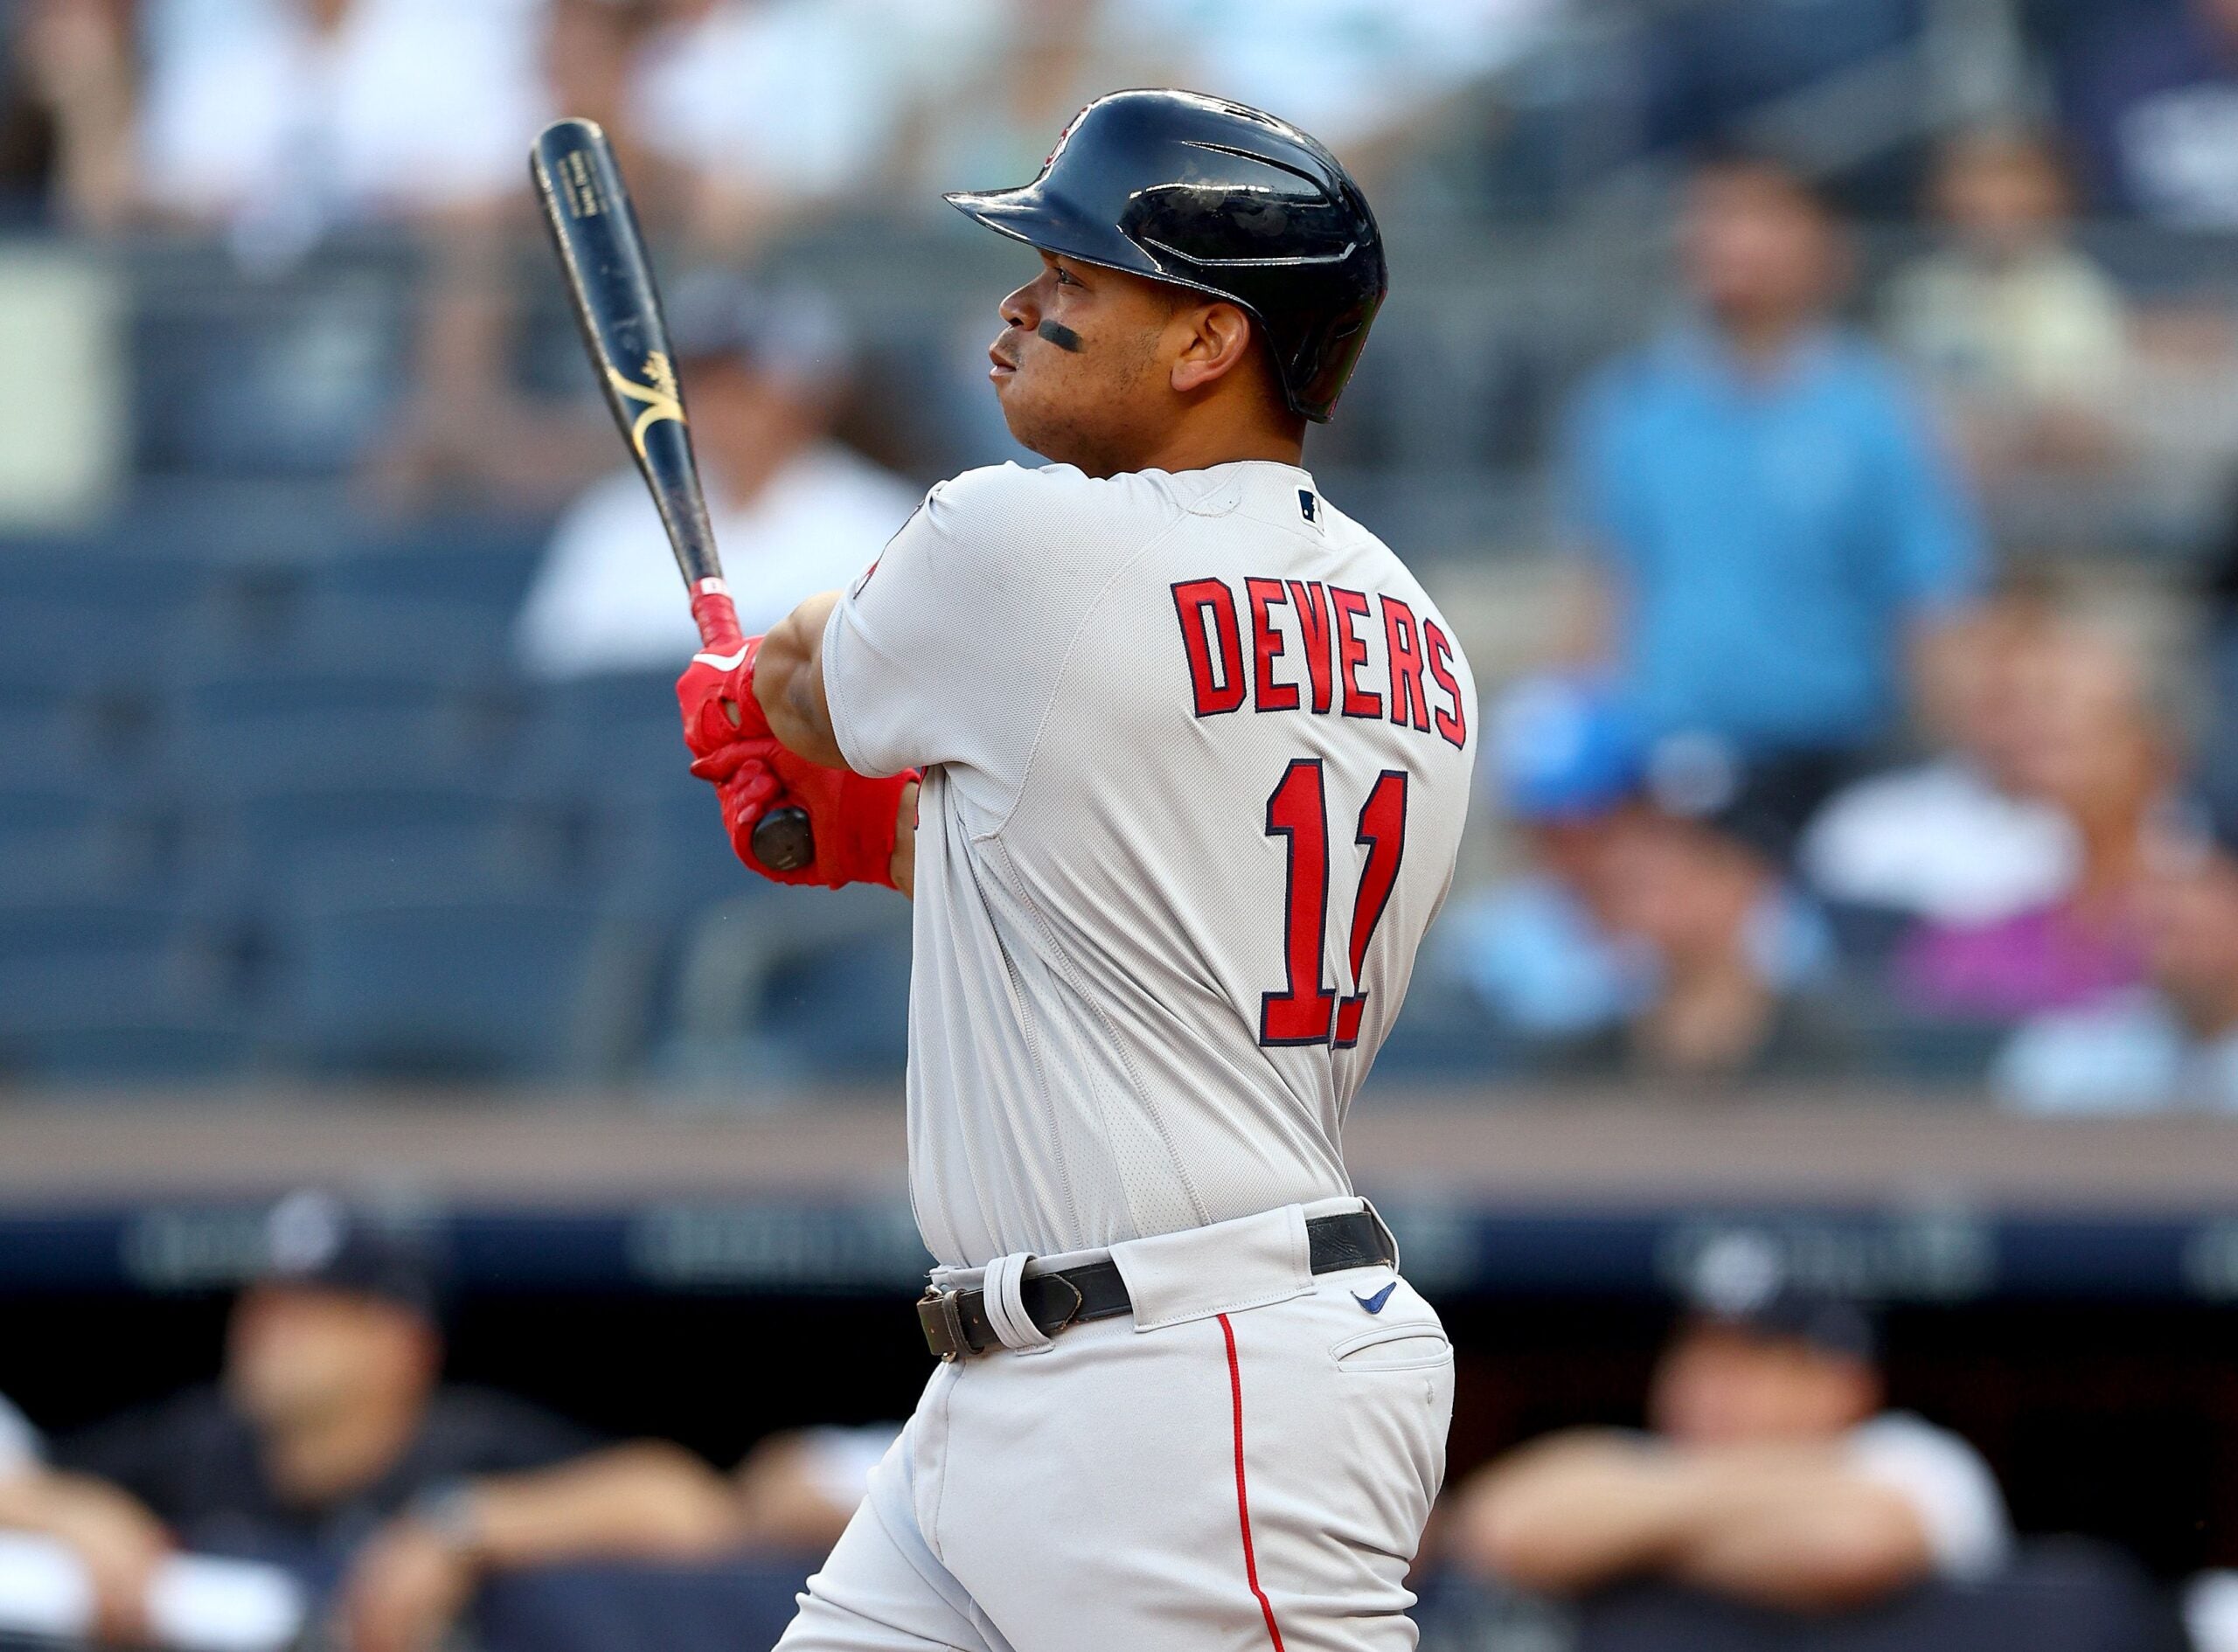 Boston's bungling of Xander Bogaerts situation doesn't bode well for Red Sox  keeping Rafael Devers long-term